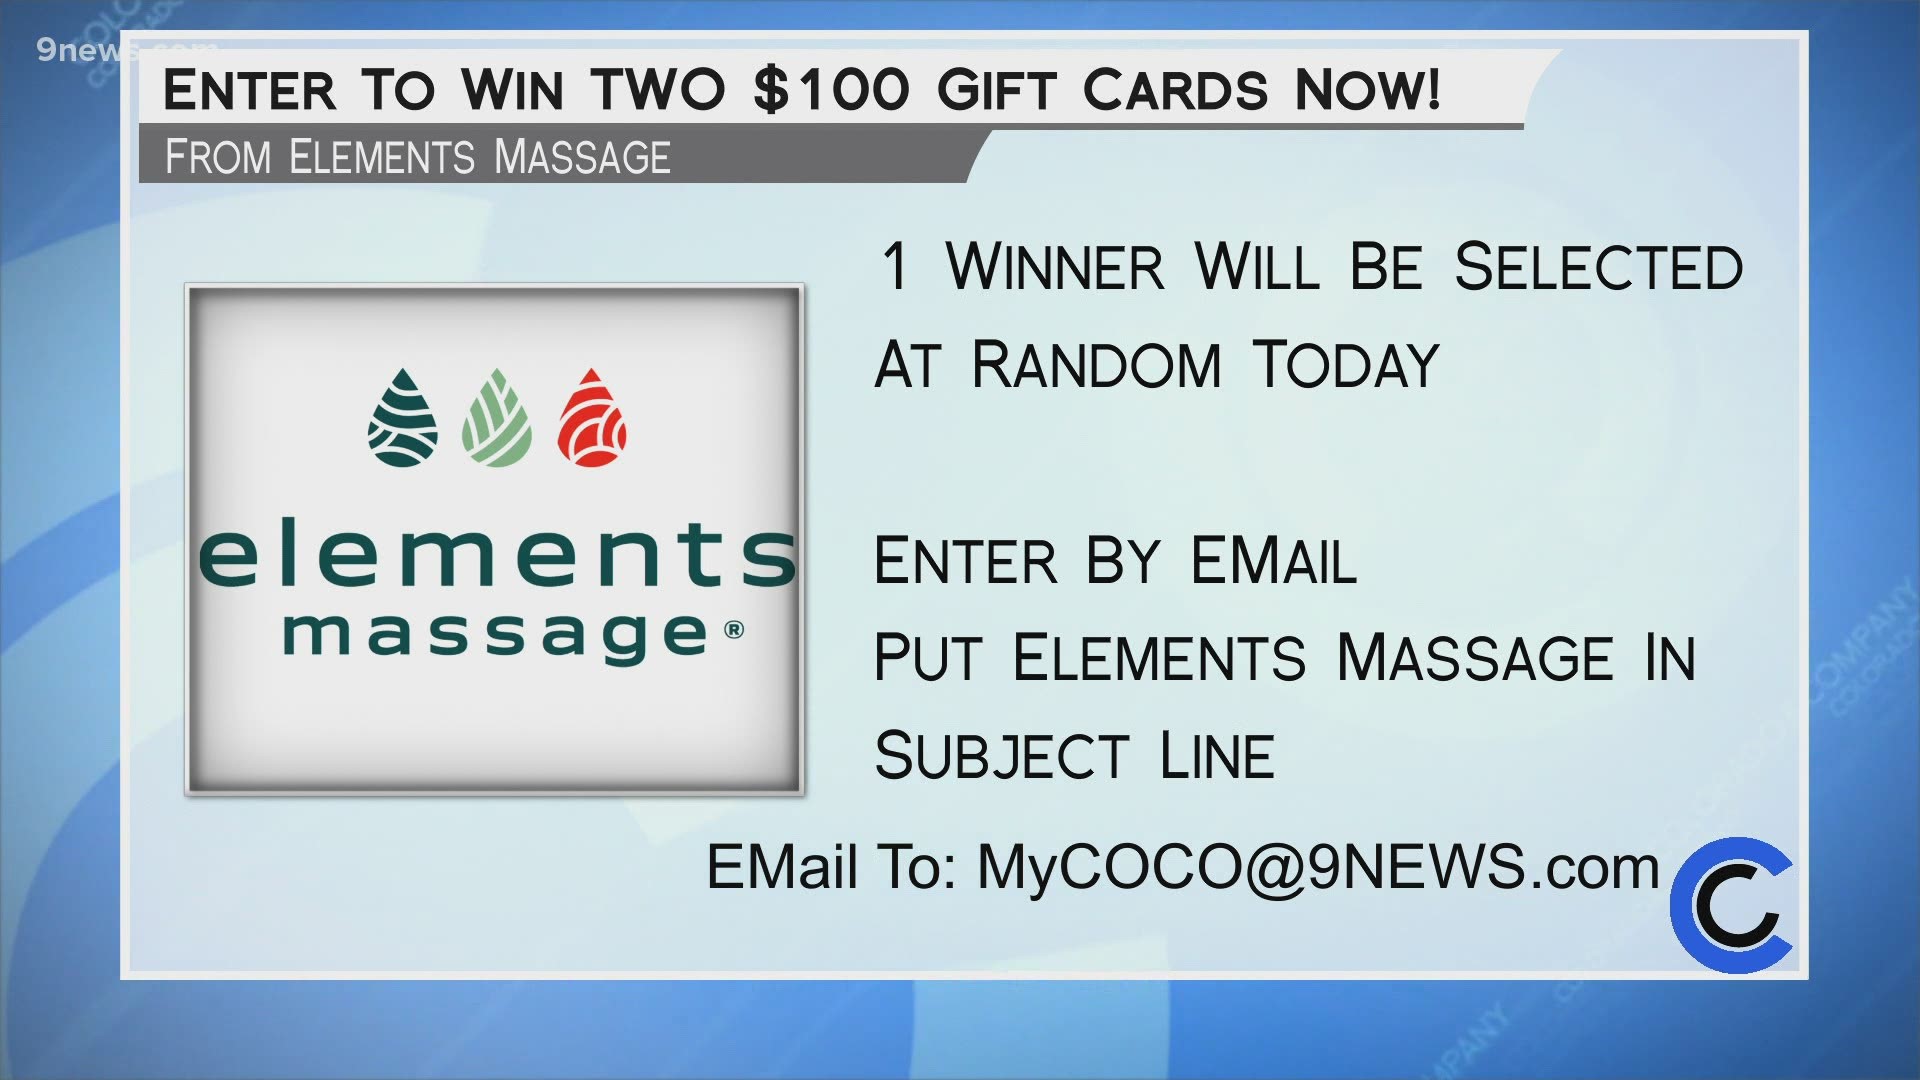 Elements Massage is open and following all health and safety protocols to keep you safe. Get started today at ElementsMassage.com. *GIVEAWAY CLOSED*